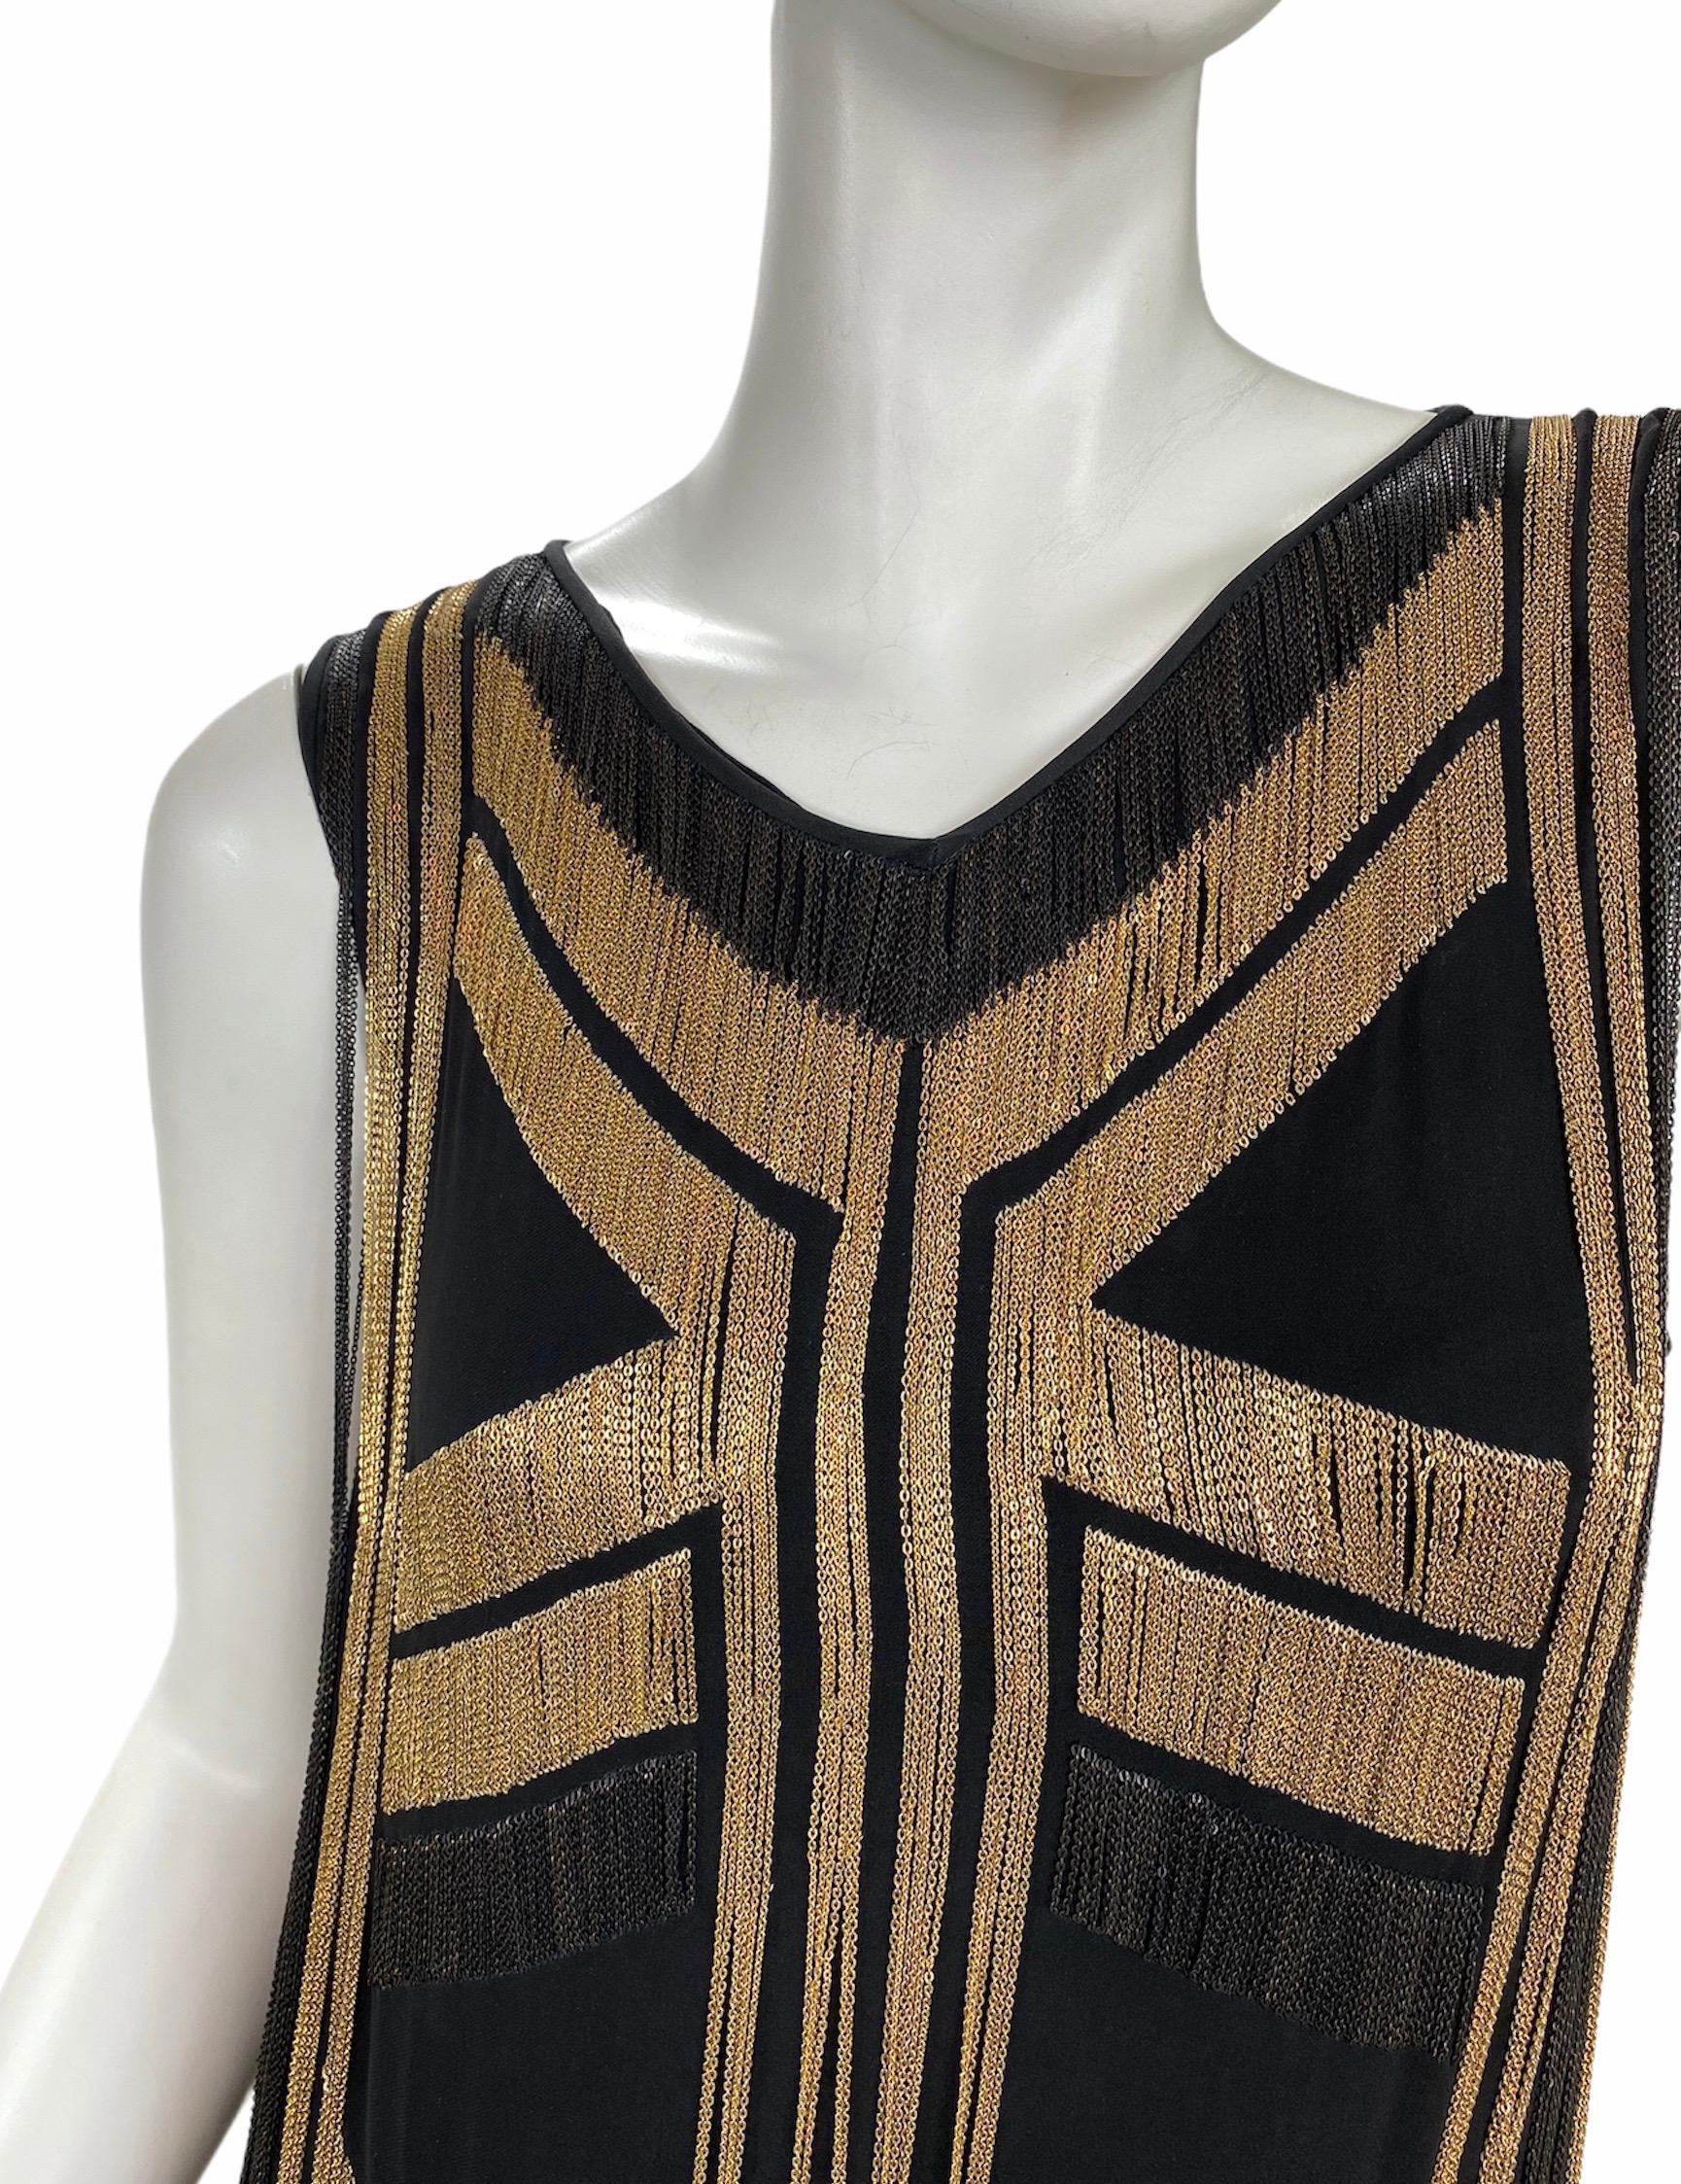 Rare Gucci Fringed chain-embellished silk-georgette dress 

Gucci glamorously re-imagines the Roaring Twenties with this flapper-inspired silk-georgette dress. Covered in delicate yet tough-talking gold and black chains, this captivating runway